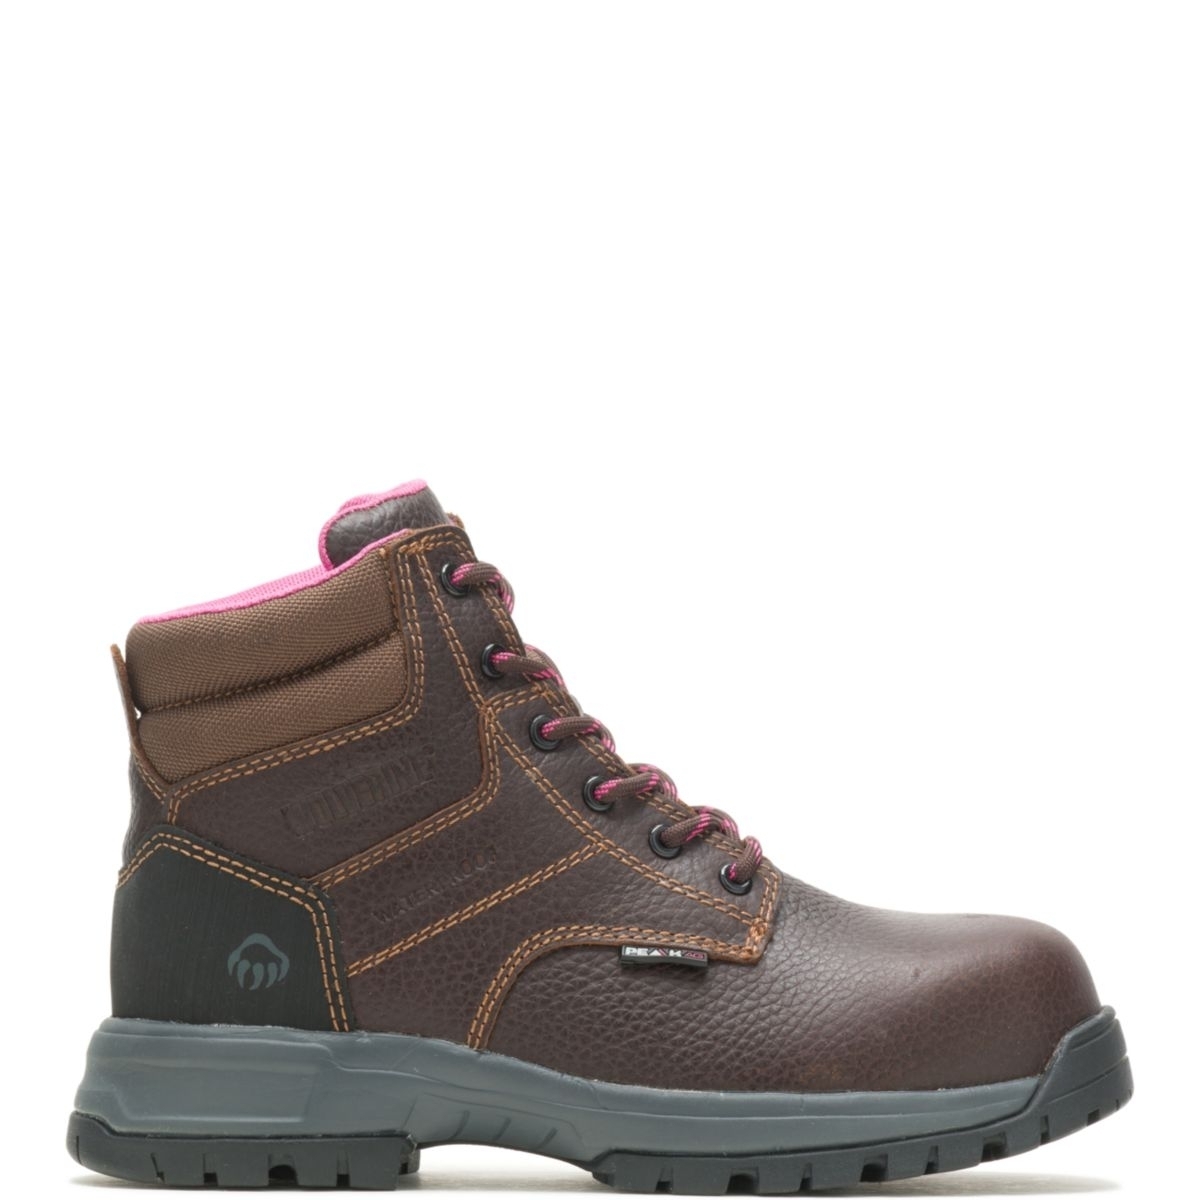 WOLVERINE Women's Piper Composite Toe Work Boot Brown - W10180 BROWN - BROWN, 8.5-D